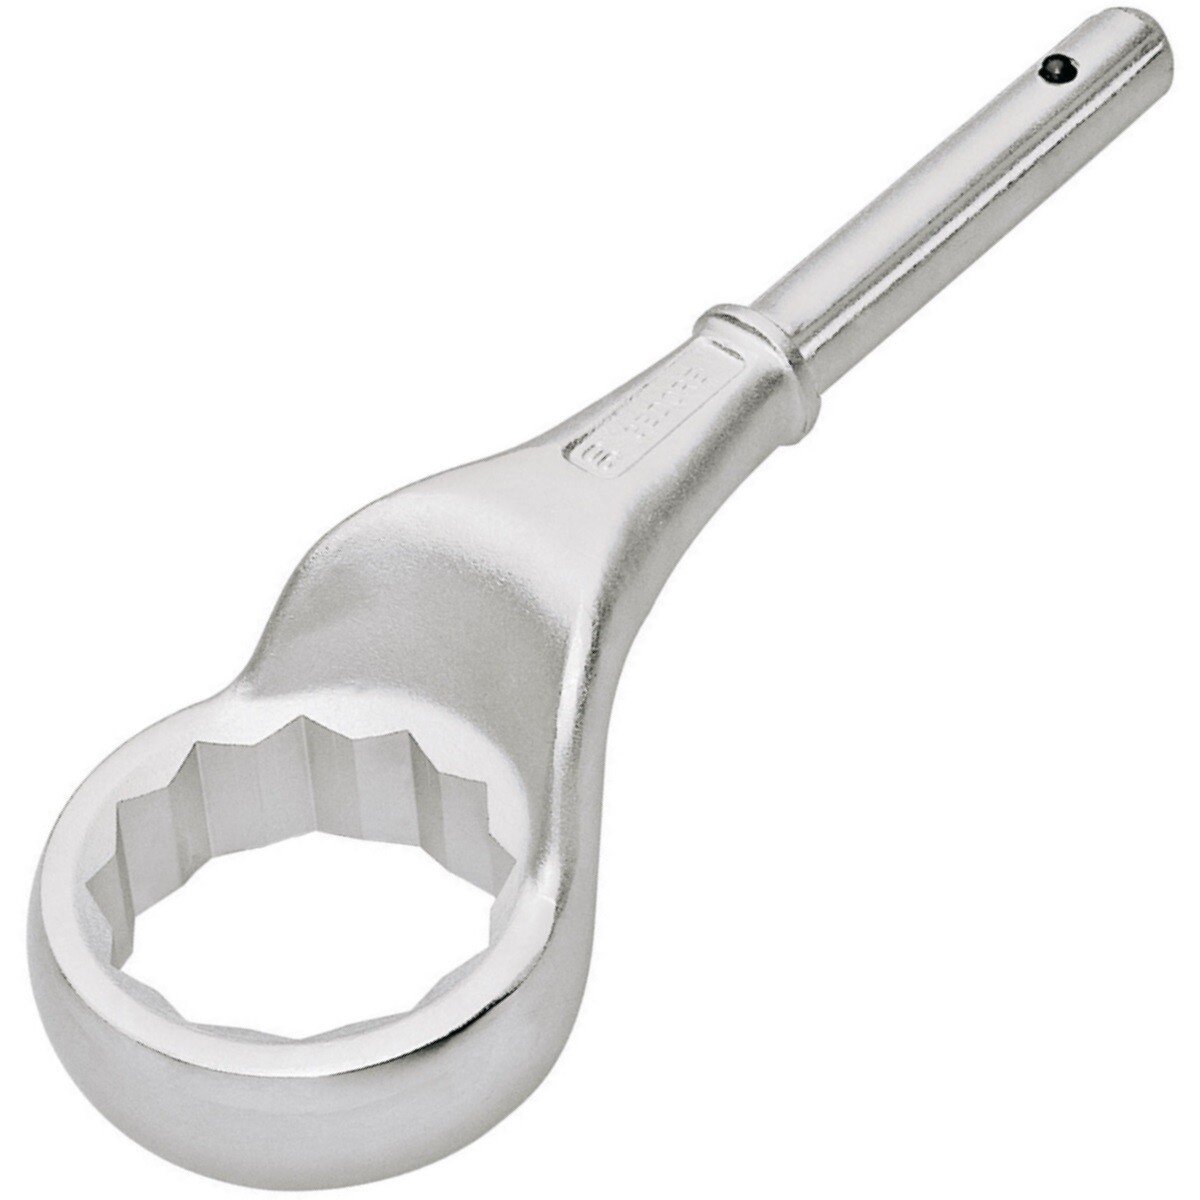 Gedore 6034220 36mm Single Ended Ring Spanner 2A 36